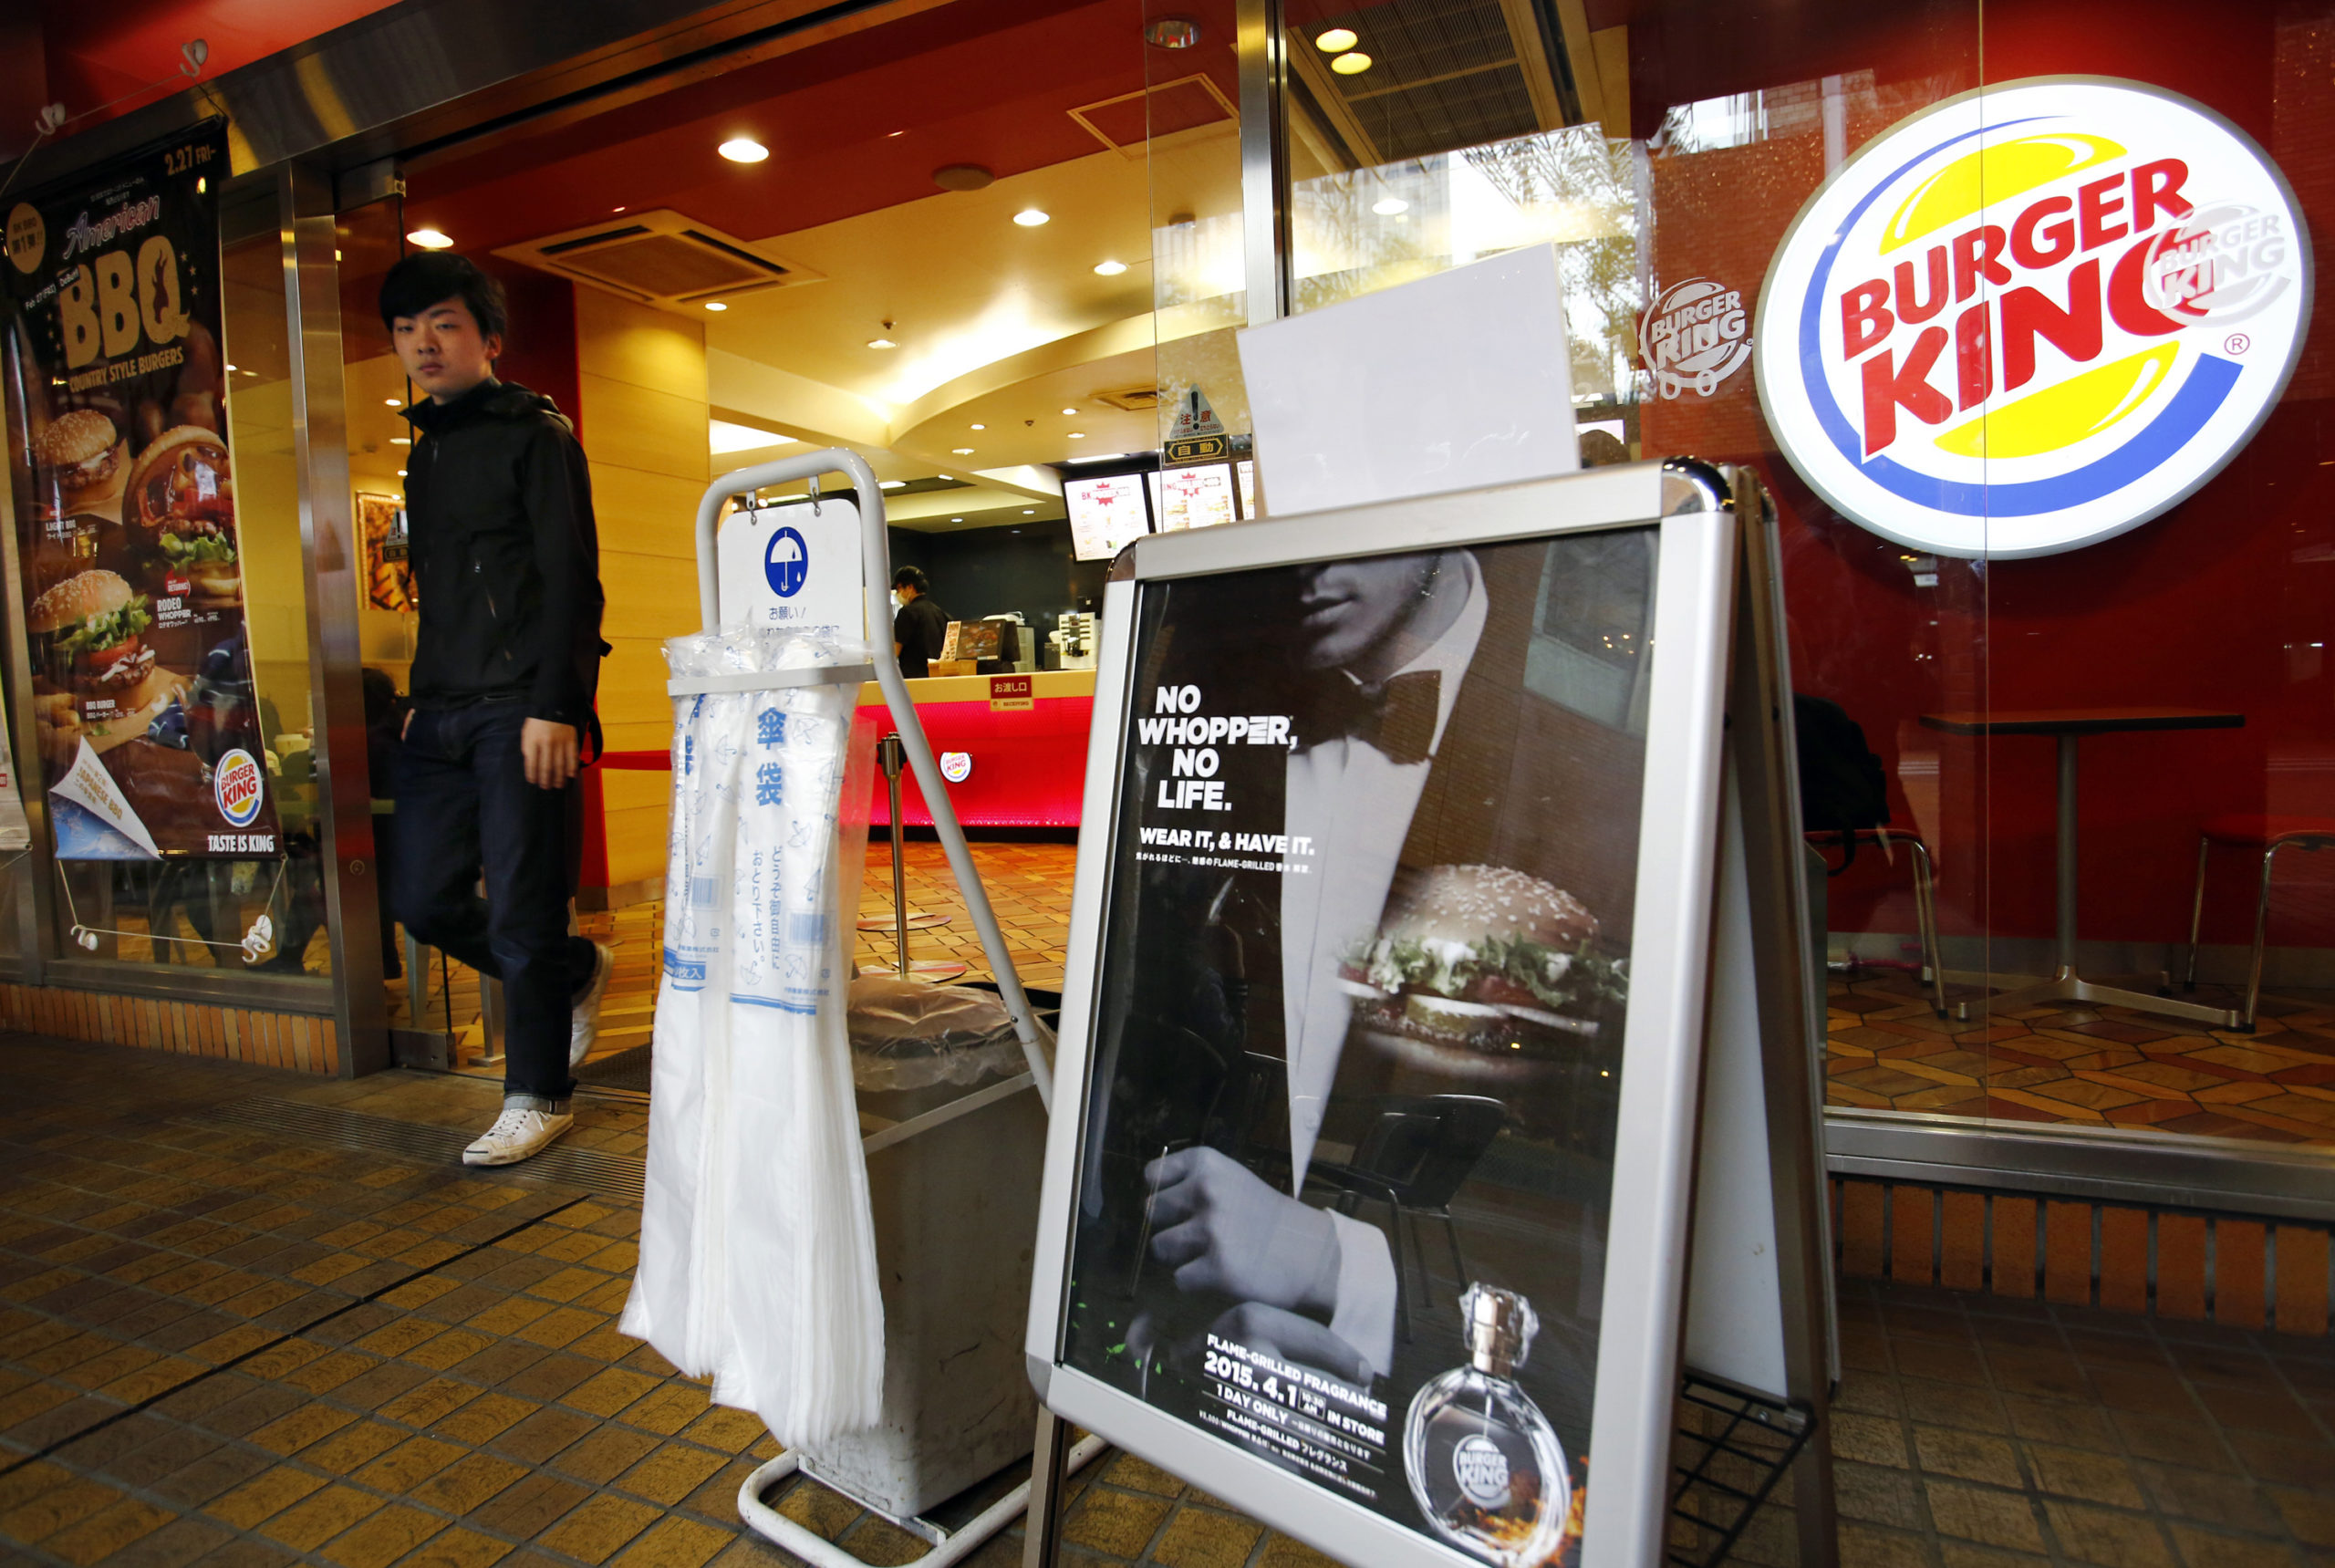 Burger King offers a solution to Japan's potato shortage